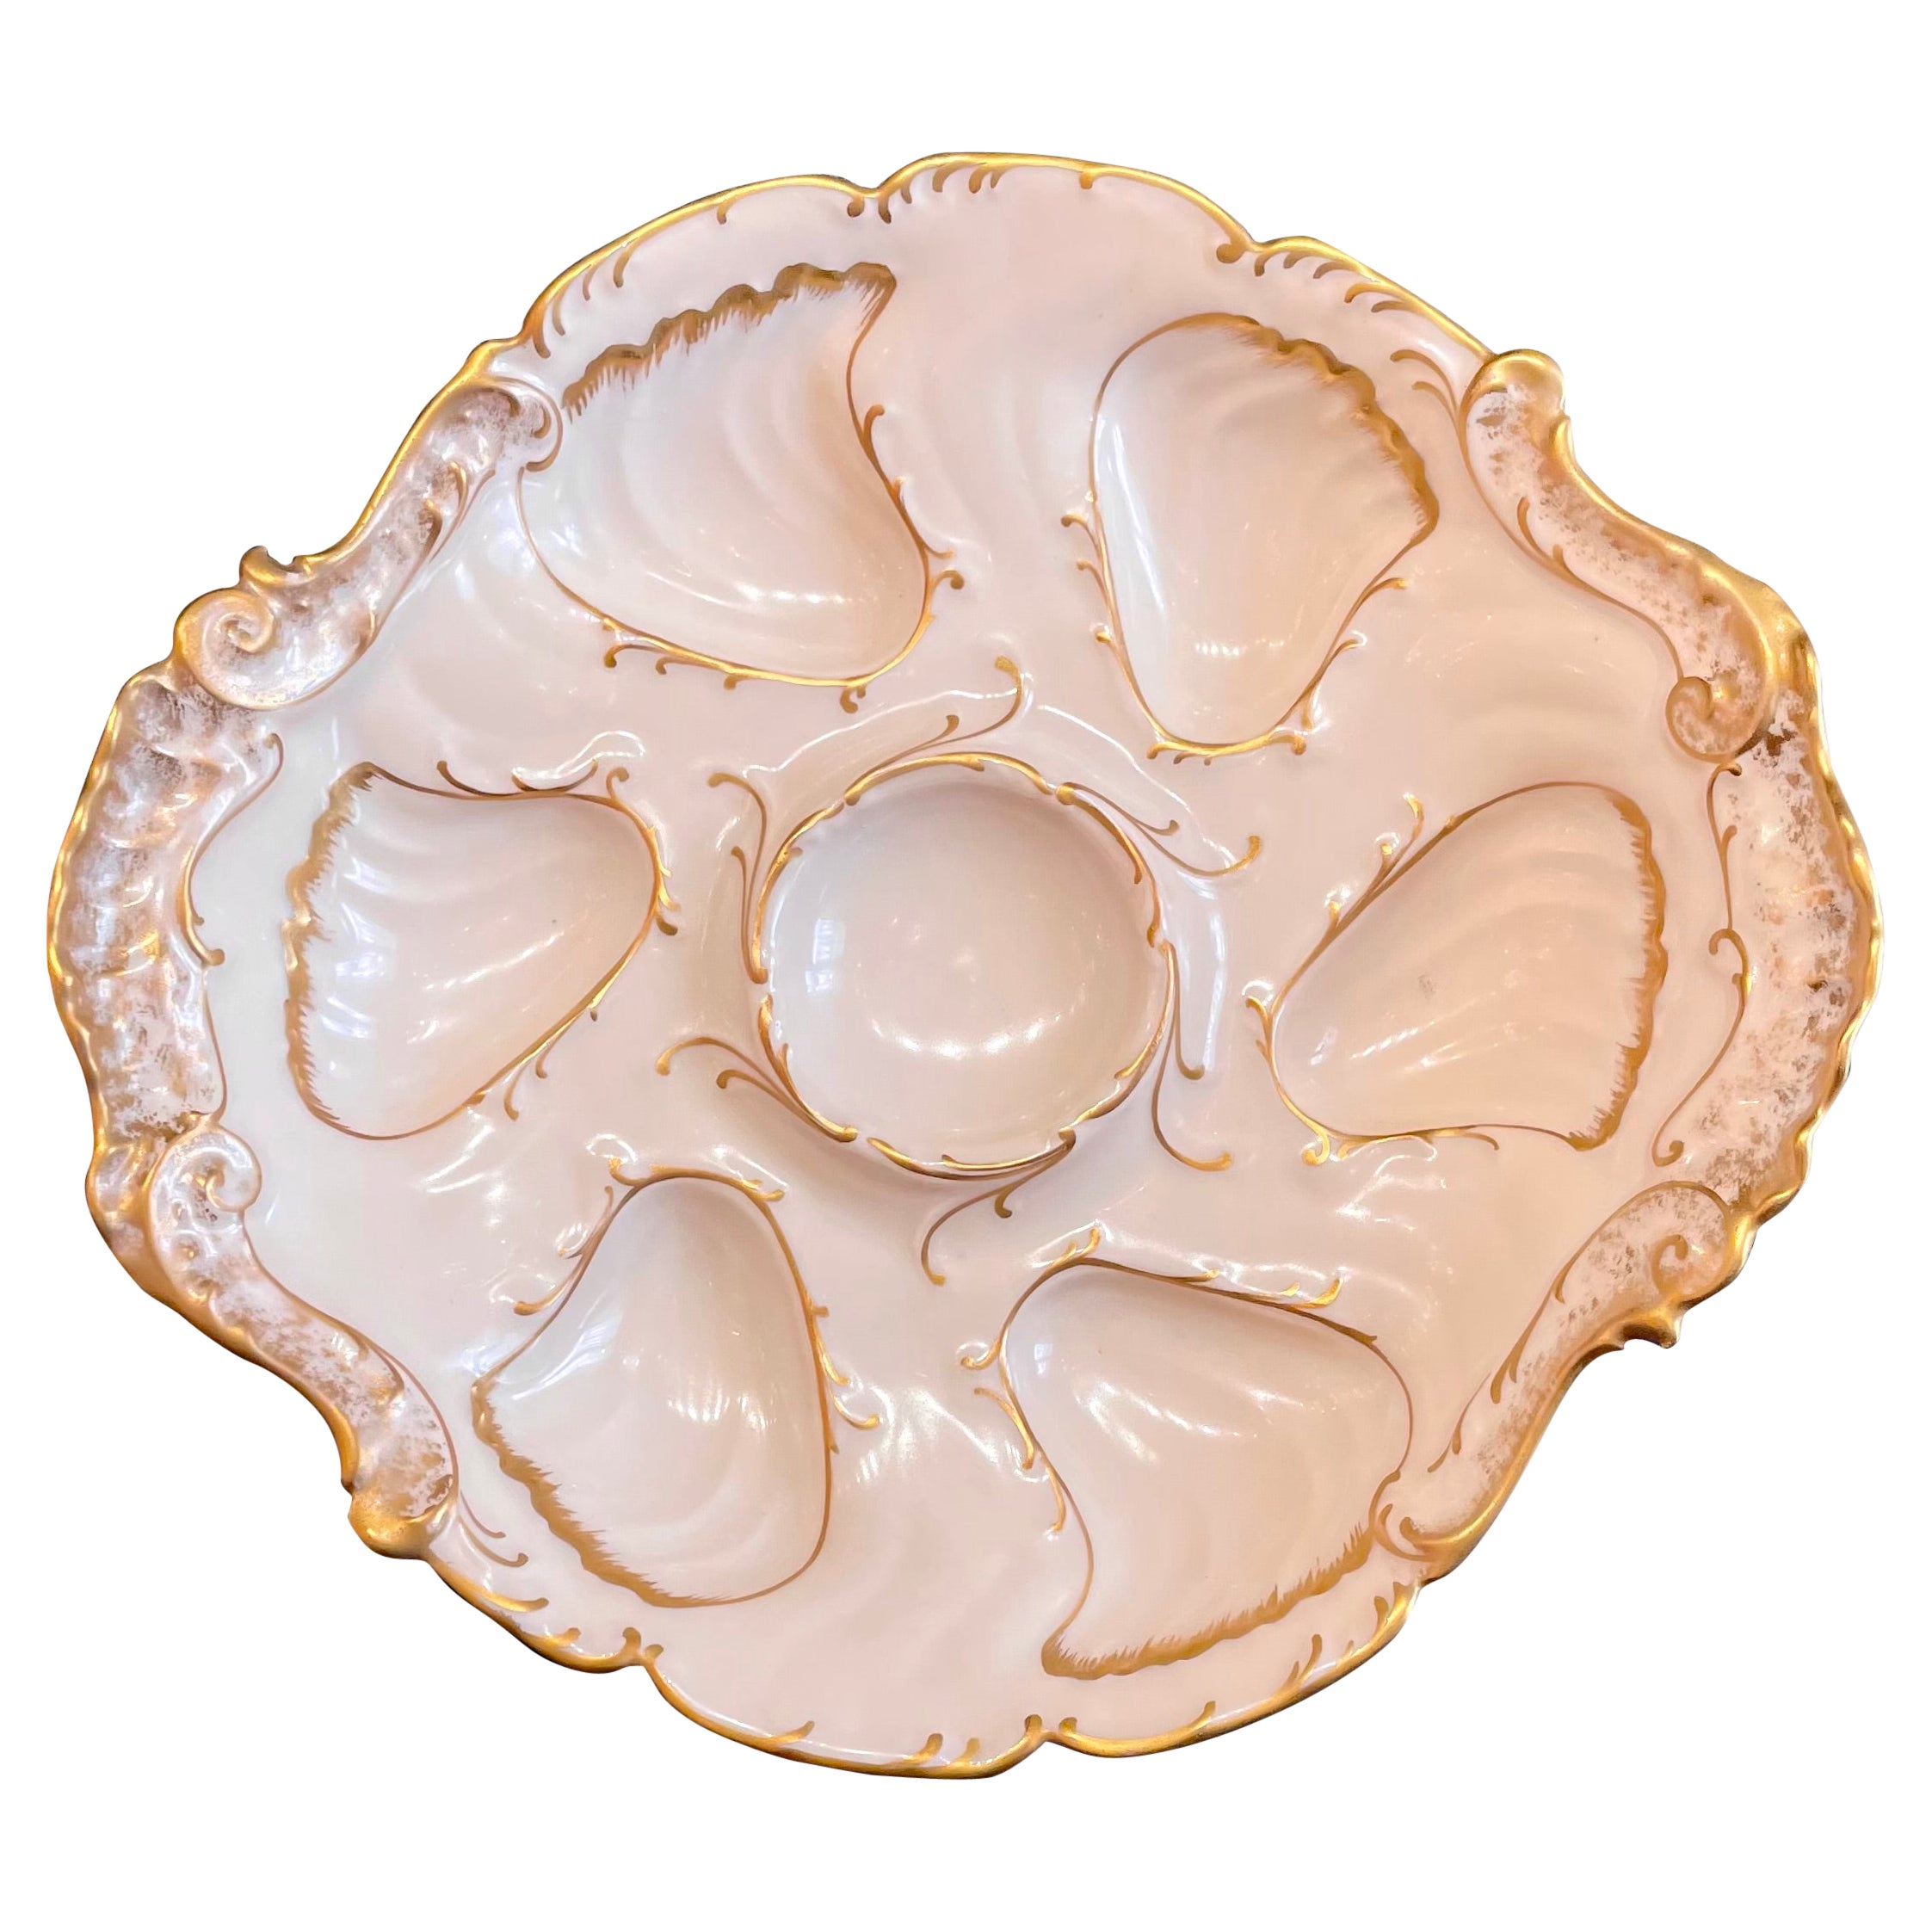 Antique French "Jules Etienne" Porcelain Unusually Shaped Oyster Plate c. 1890's For Sale